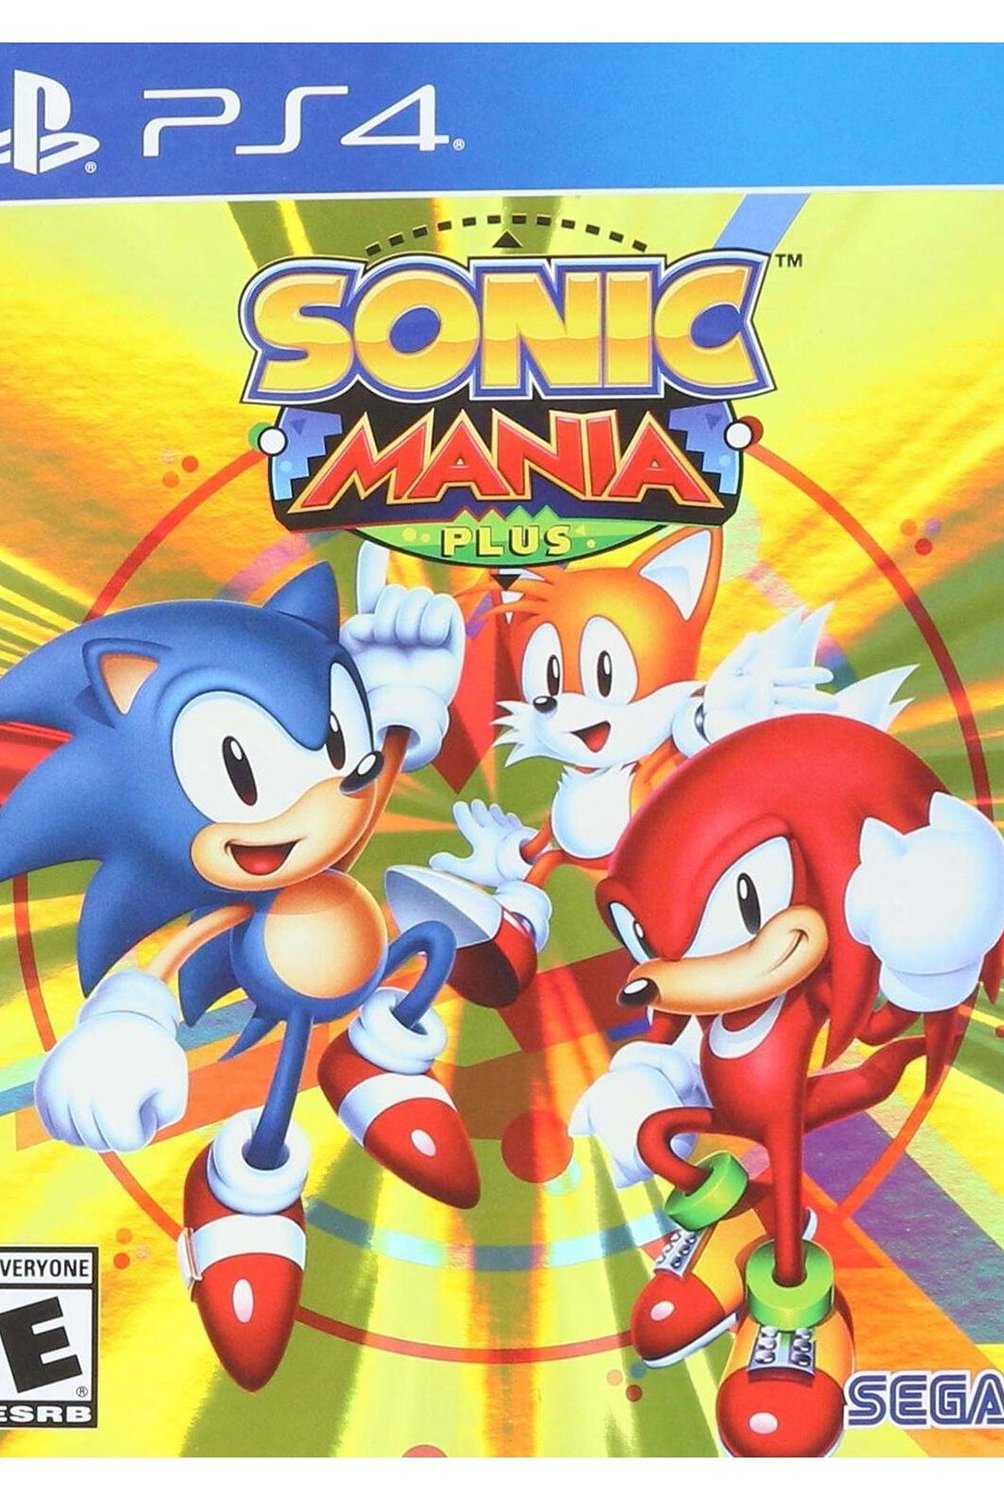 PLAYSTATION - SONIC MANIA PLUS - PS4.